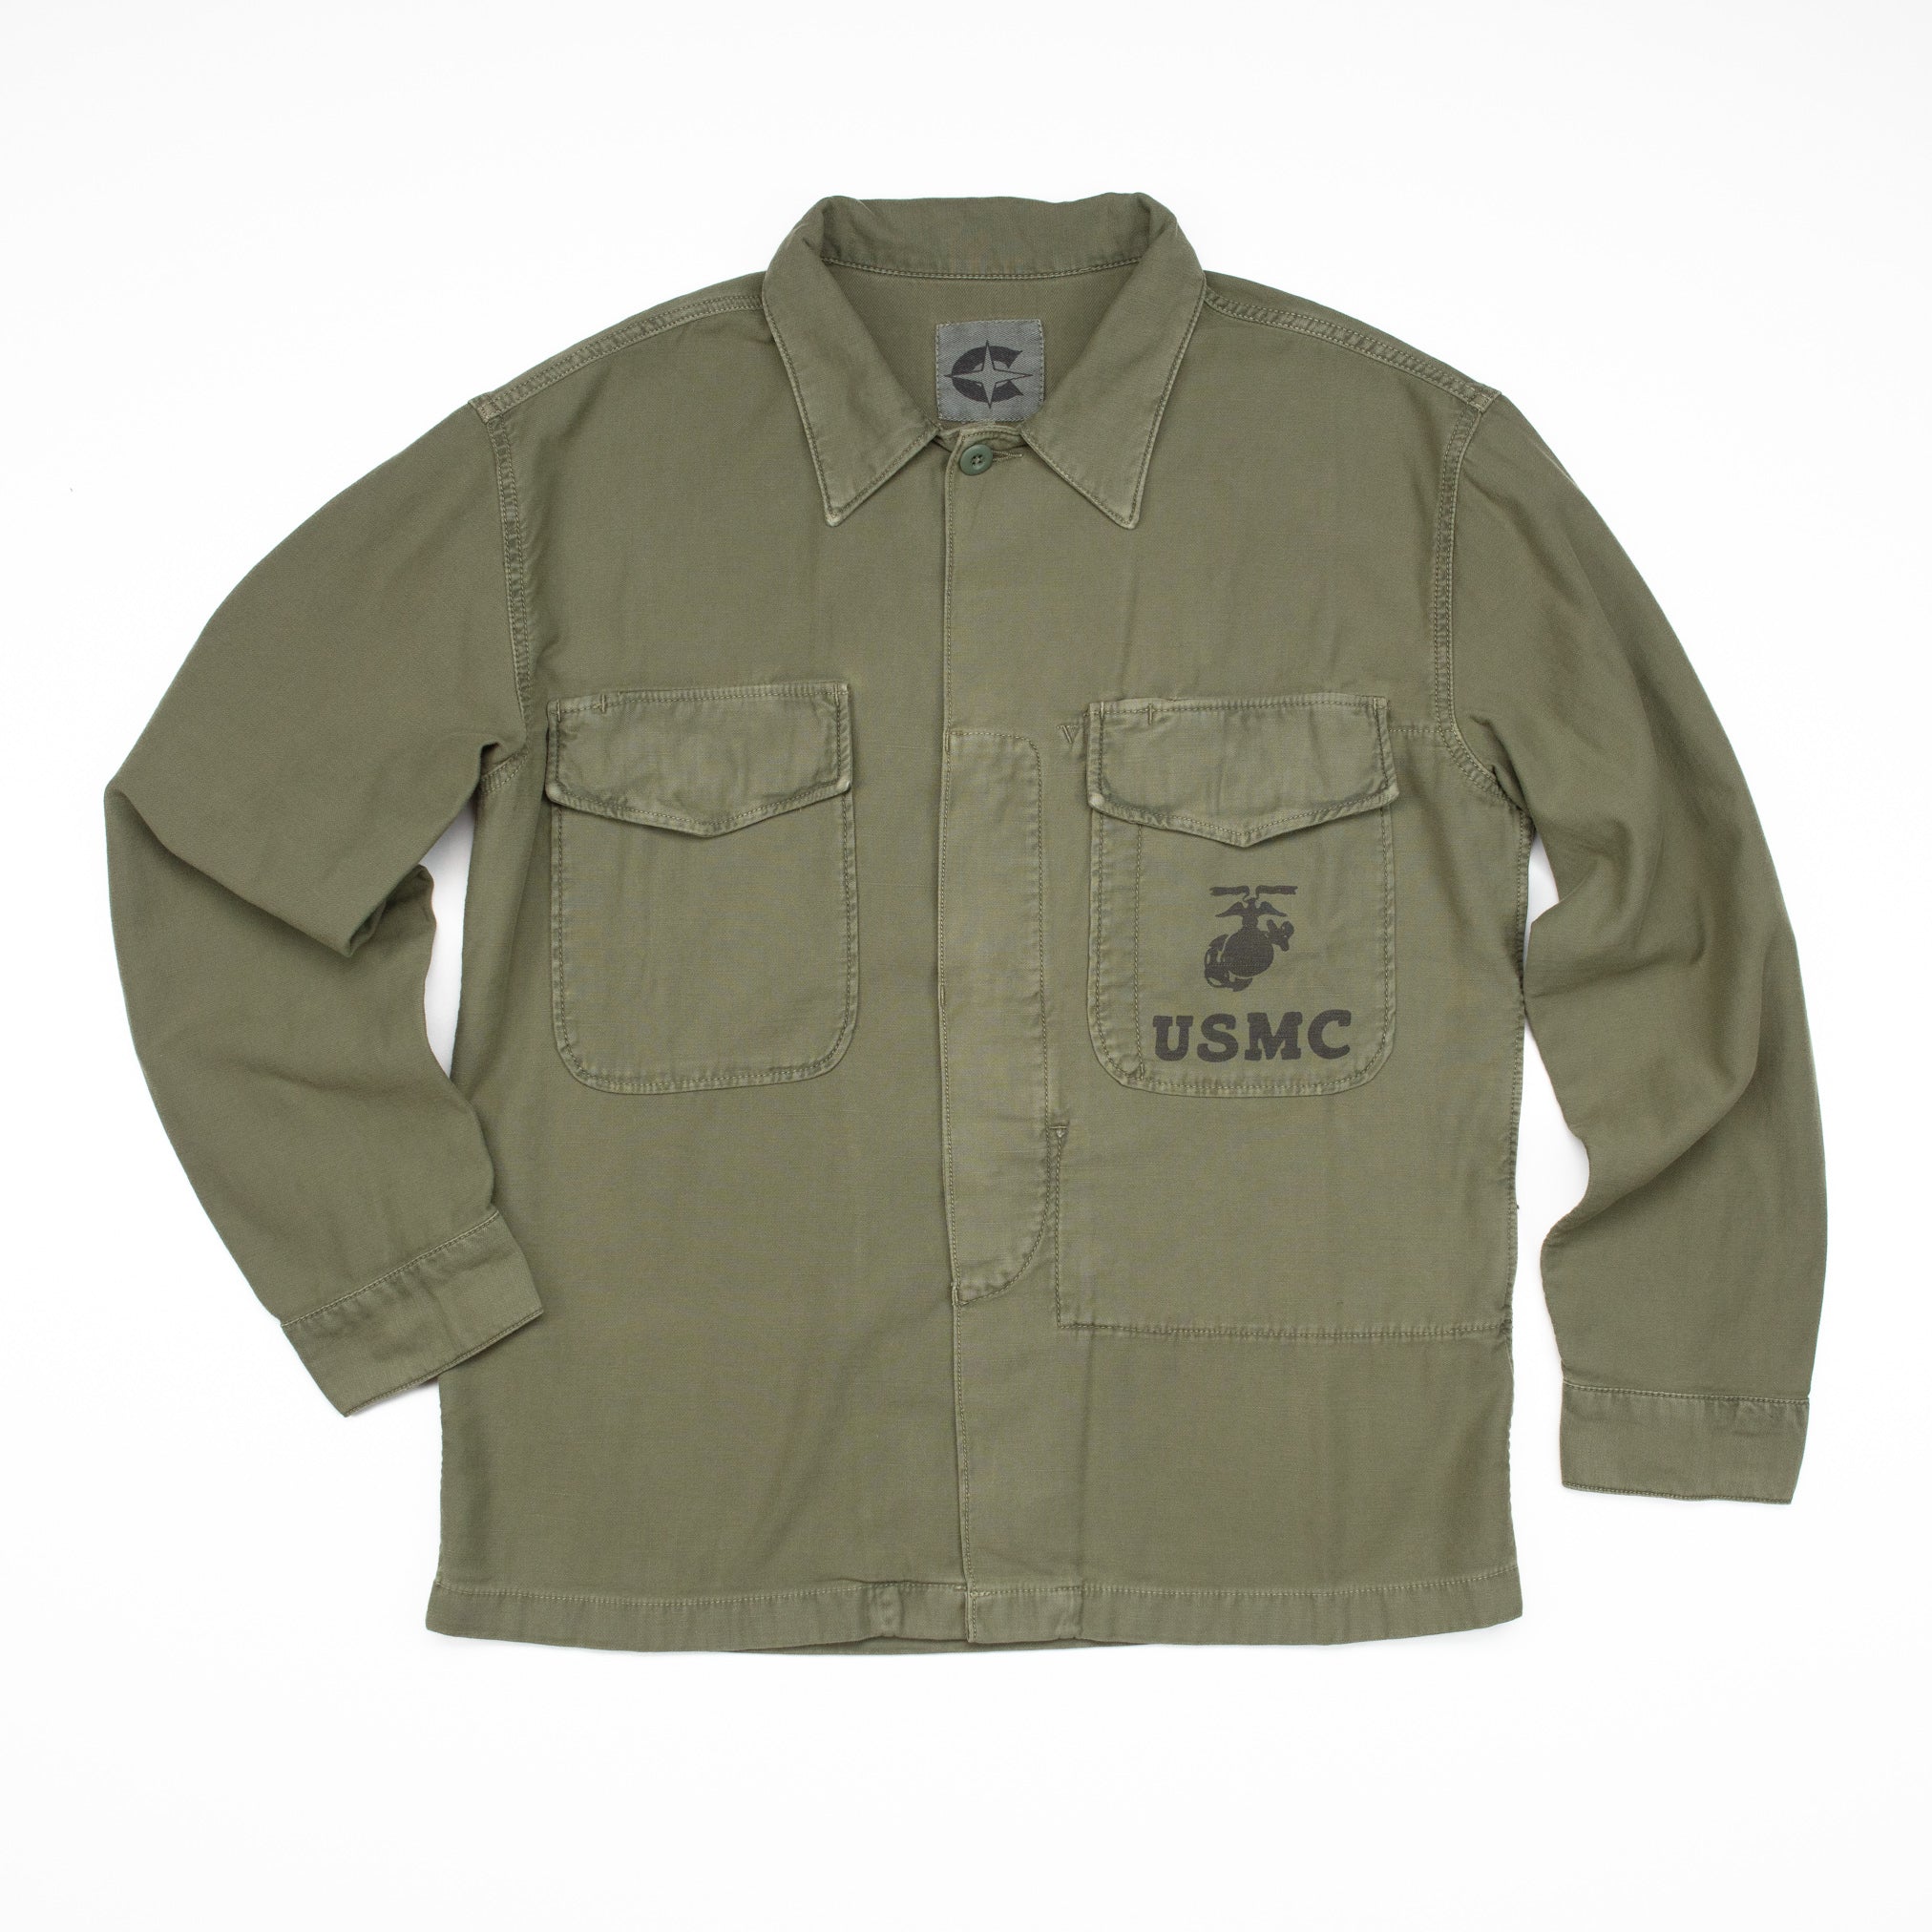 P56 Jacket in Military Green